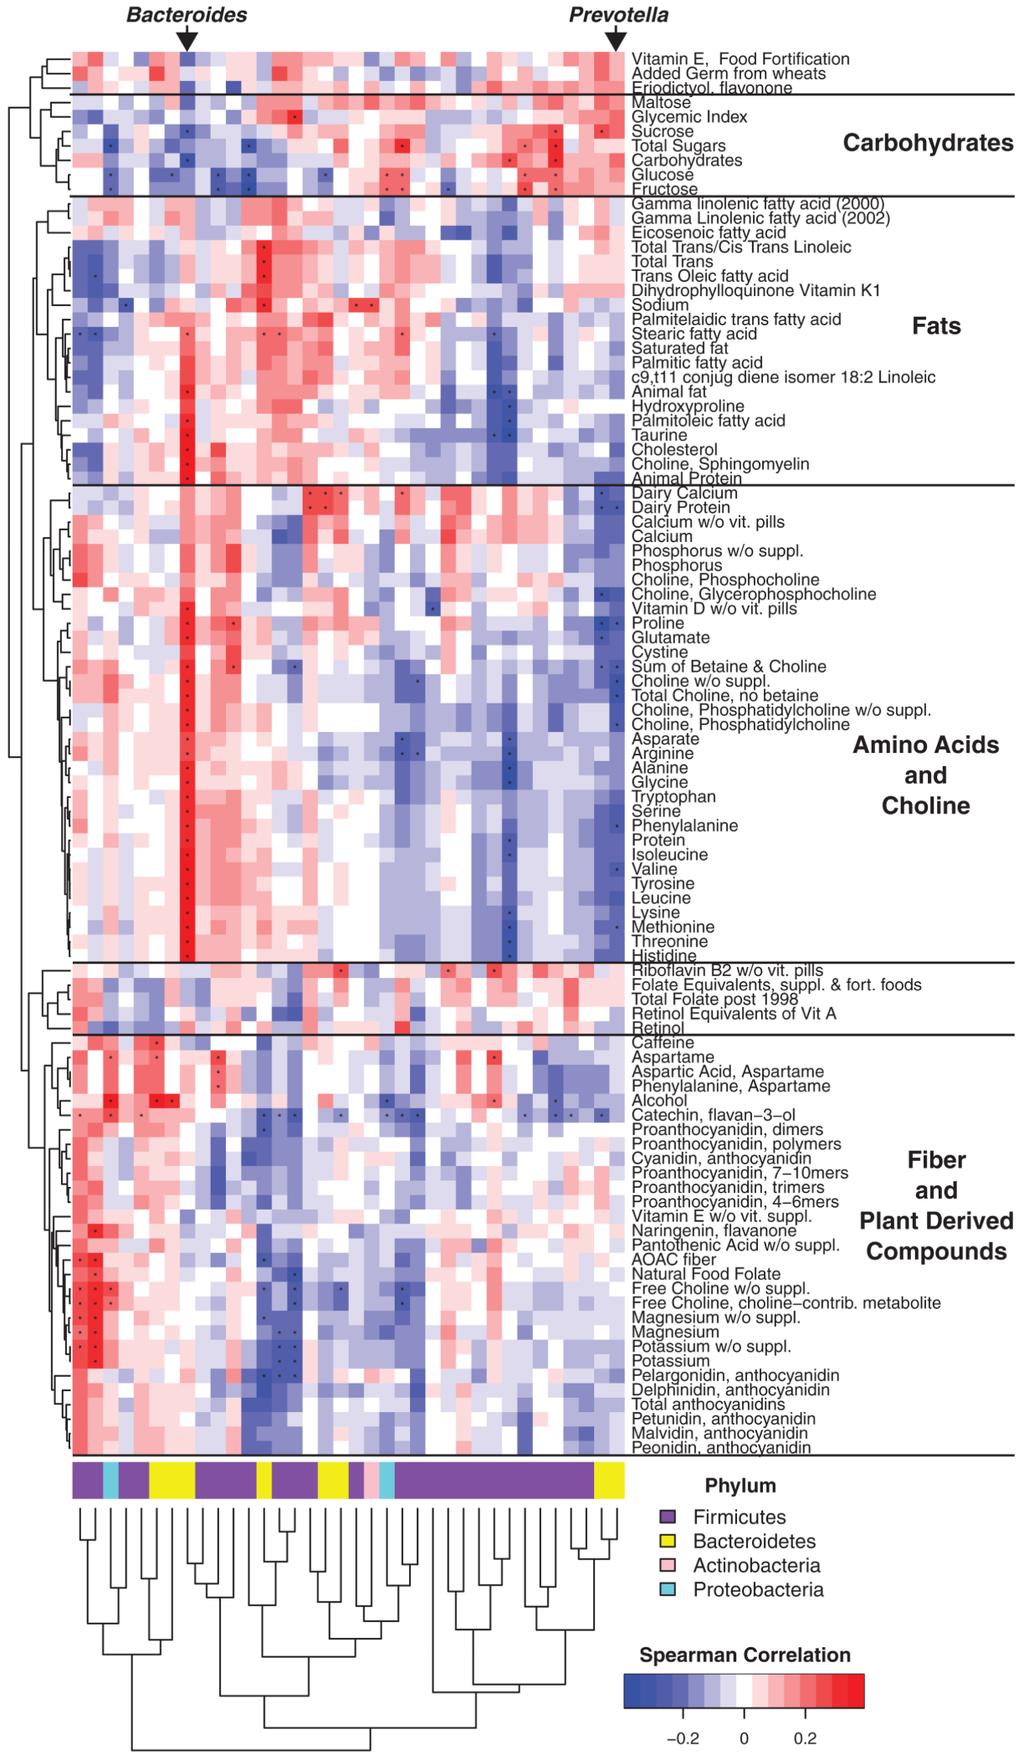 Wu et al. Page 6 Fig. 1. Correlation of diet and gut microbial taxa identified in the cross-sectional COMBO analysis.